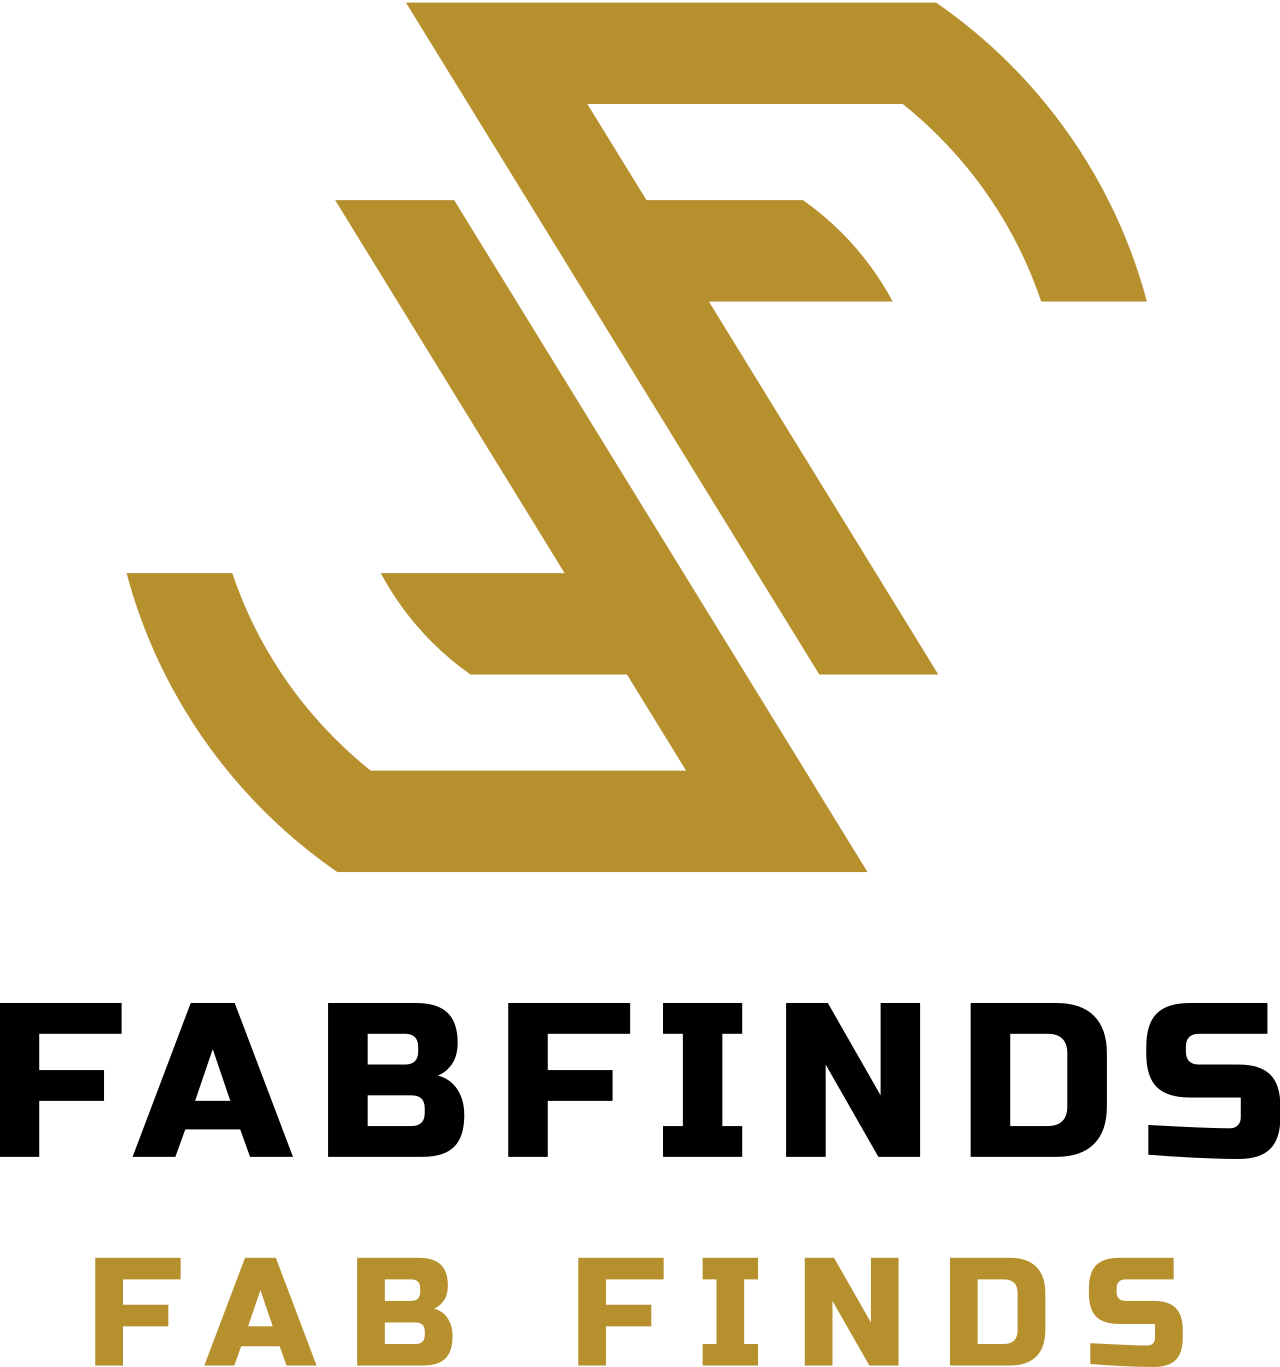 FabFinds's web page